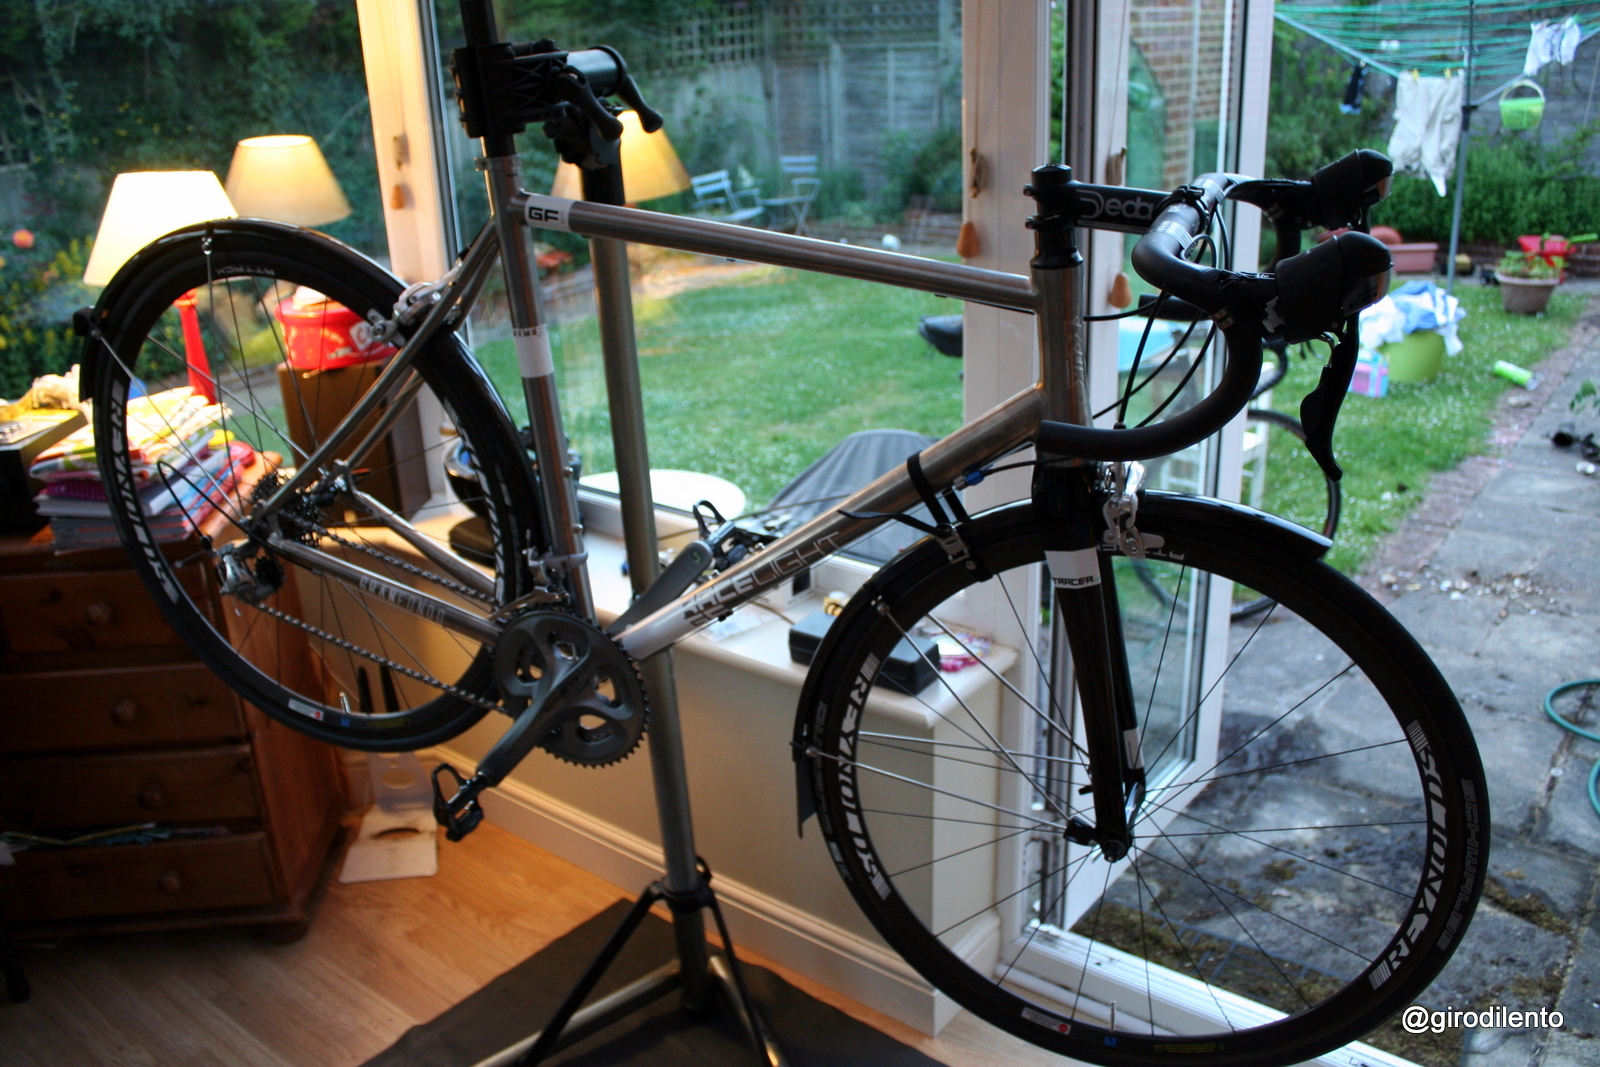 After James kindly fitted the mudguards